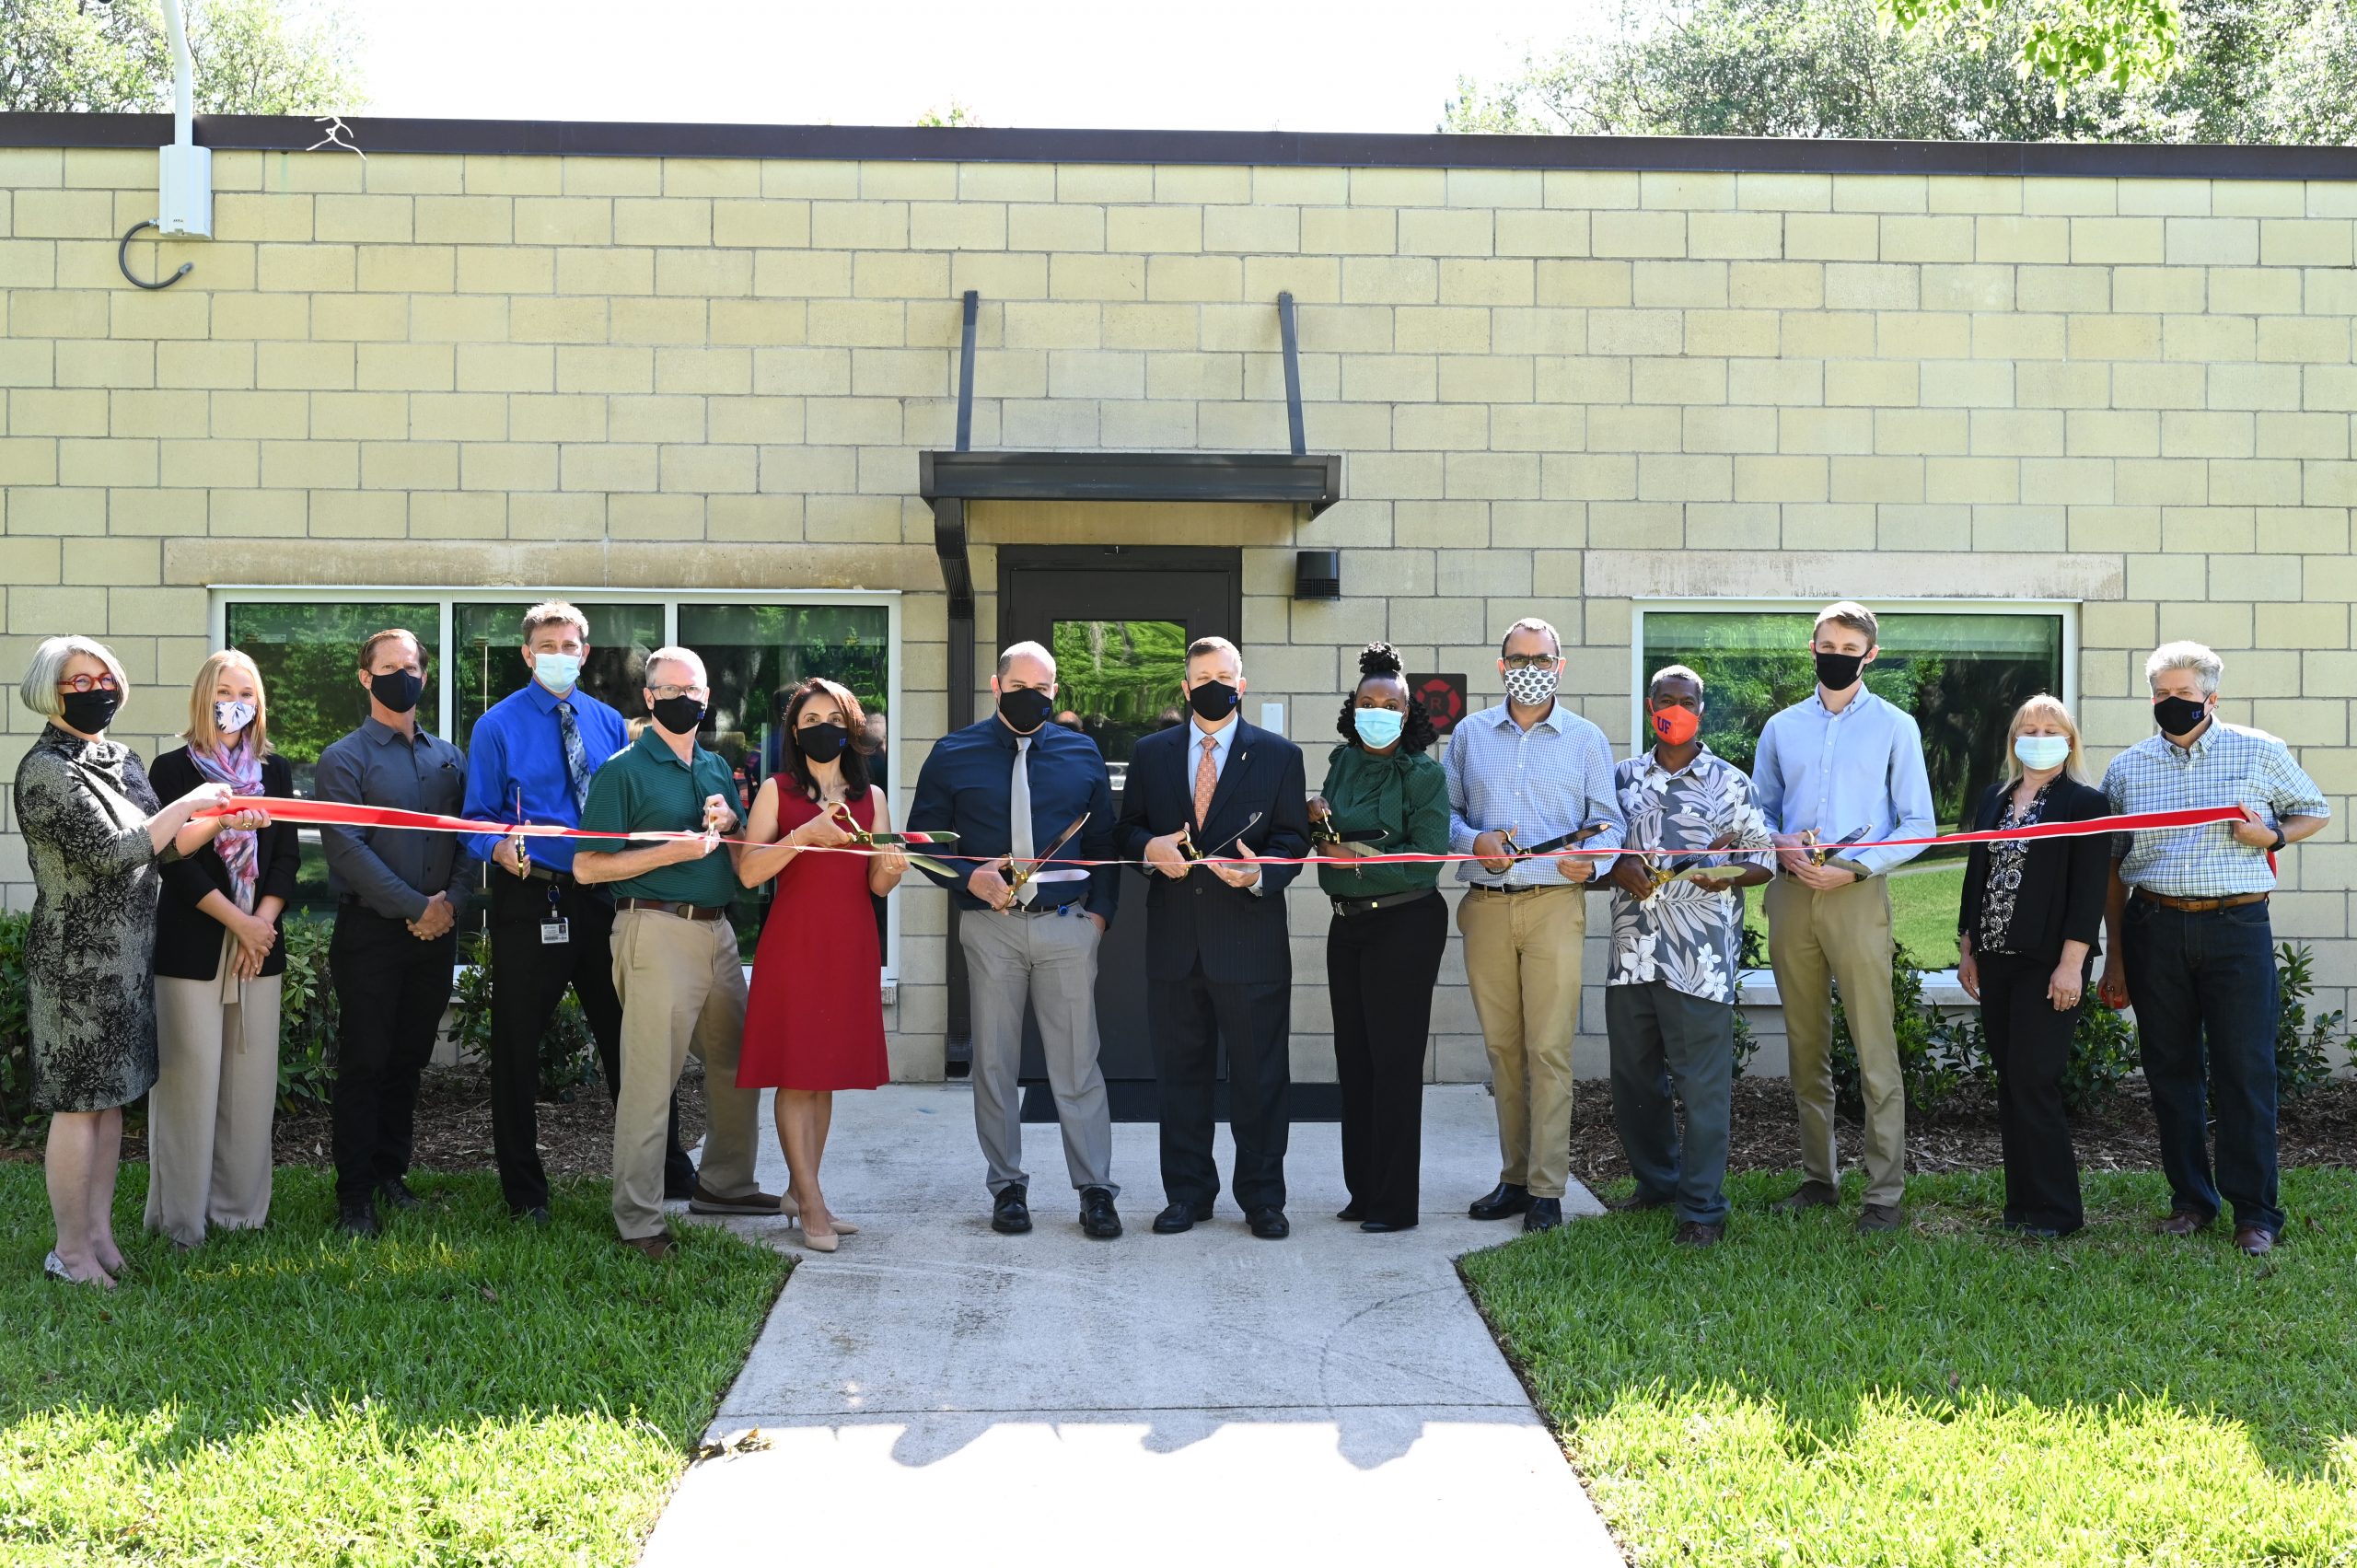 UF Physical Security Moves Back to Their Renovated Home